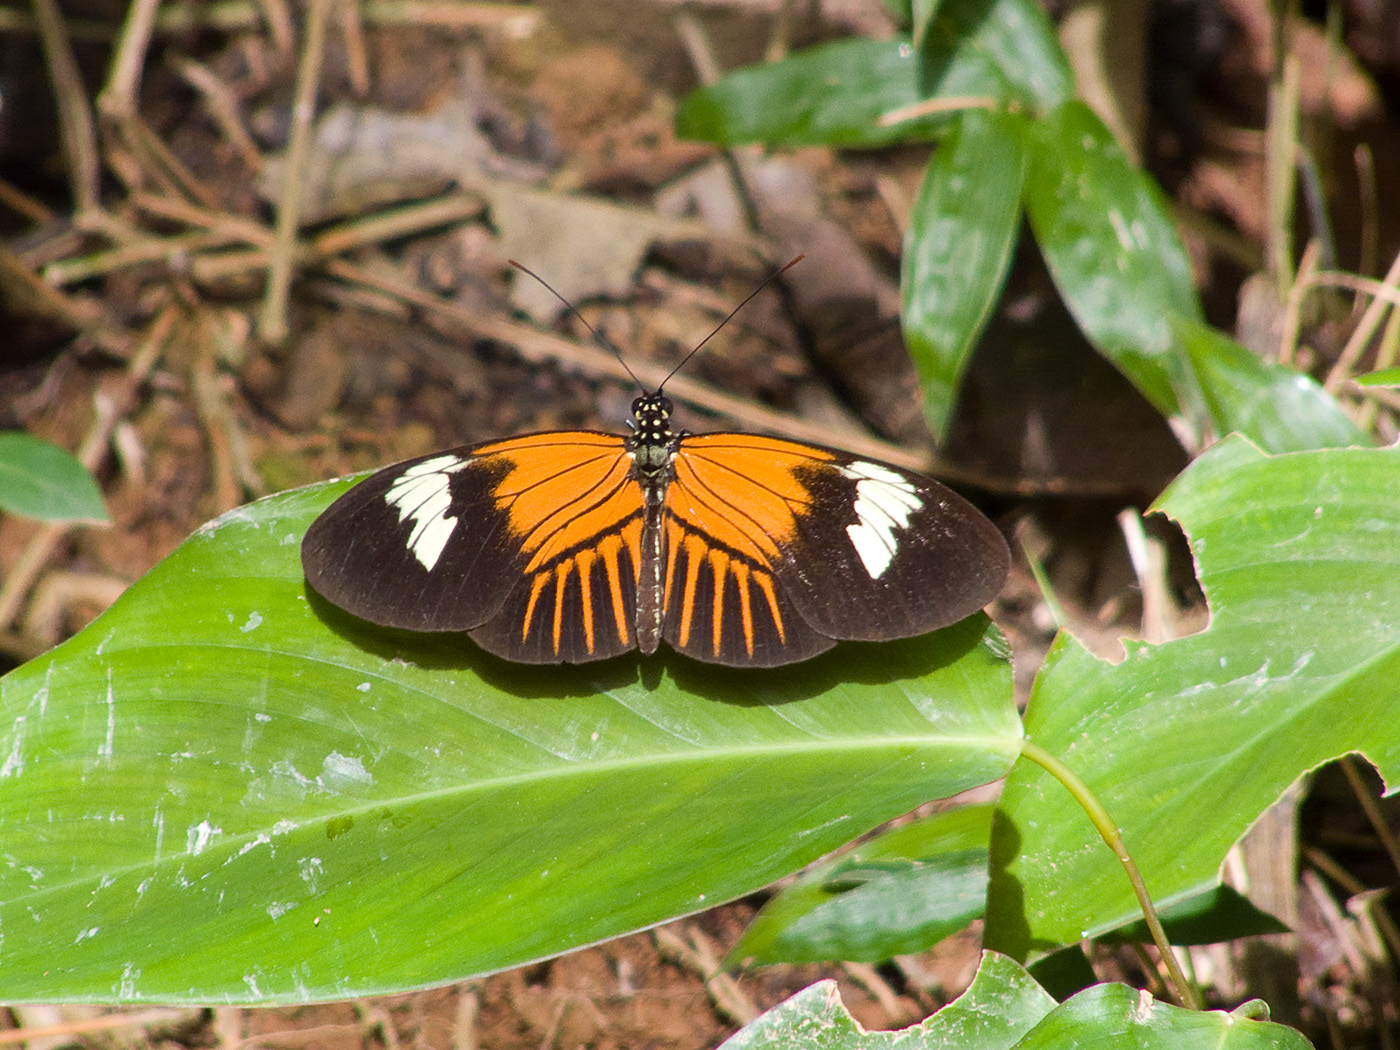 Postman Butterfly, Tambopata National Reserve